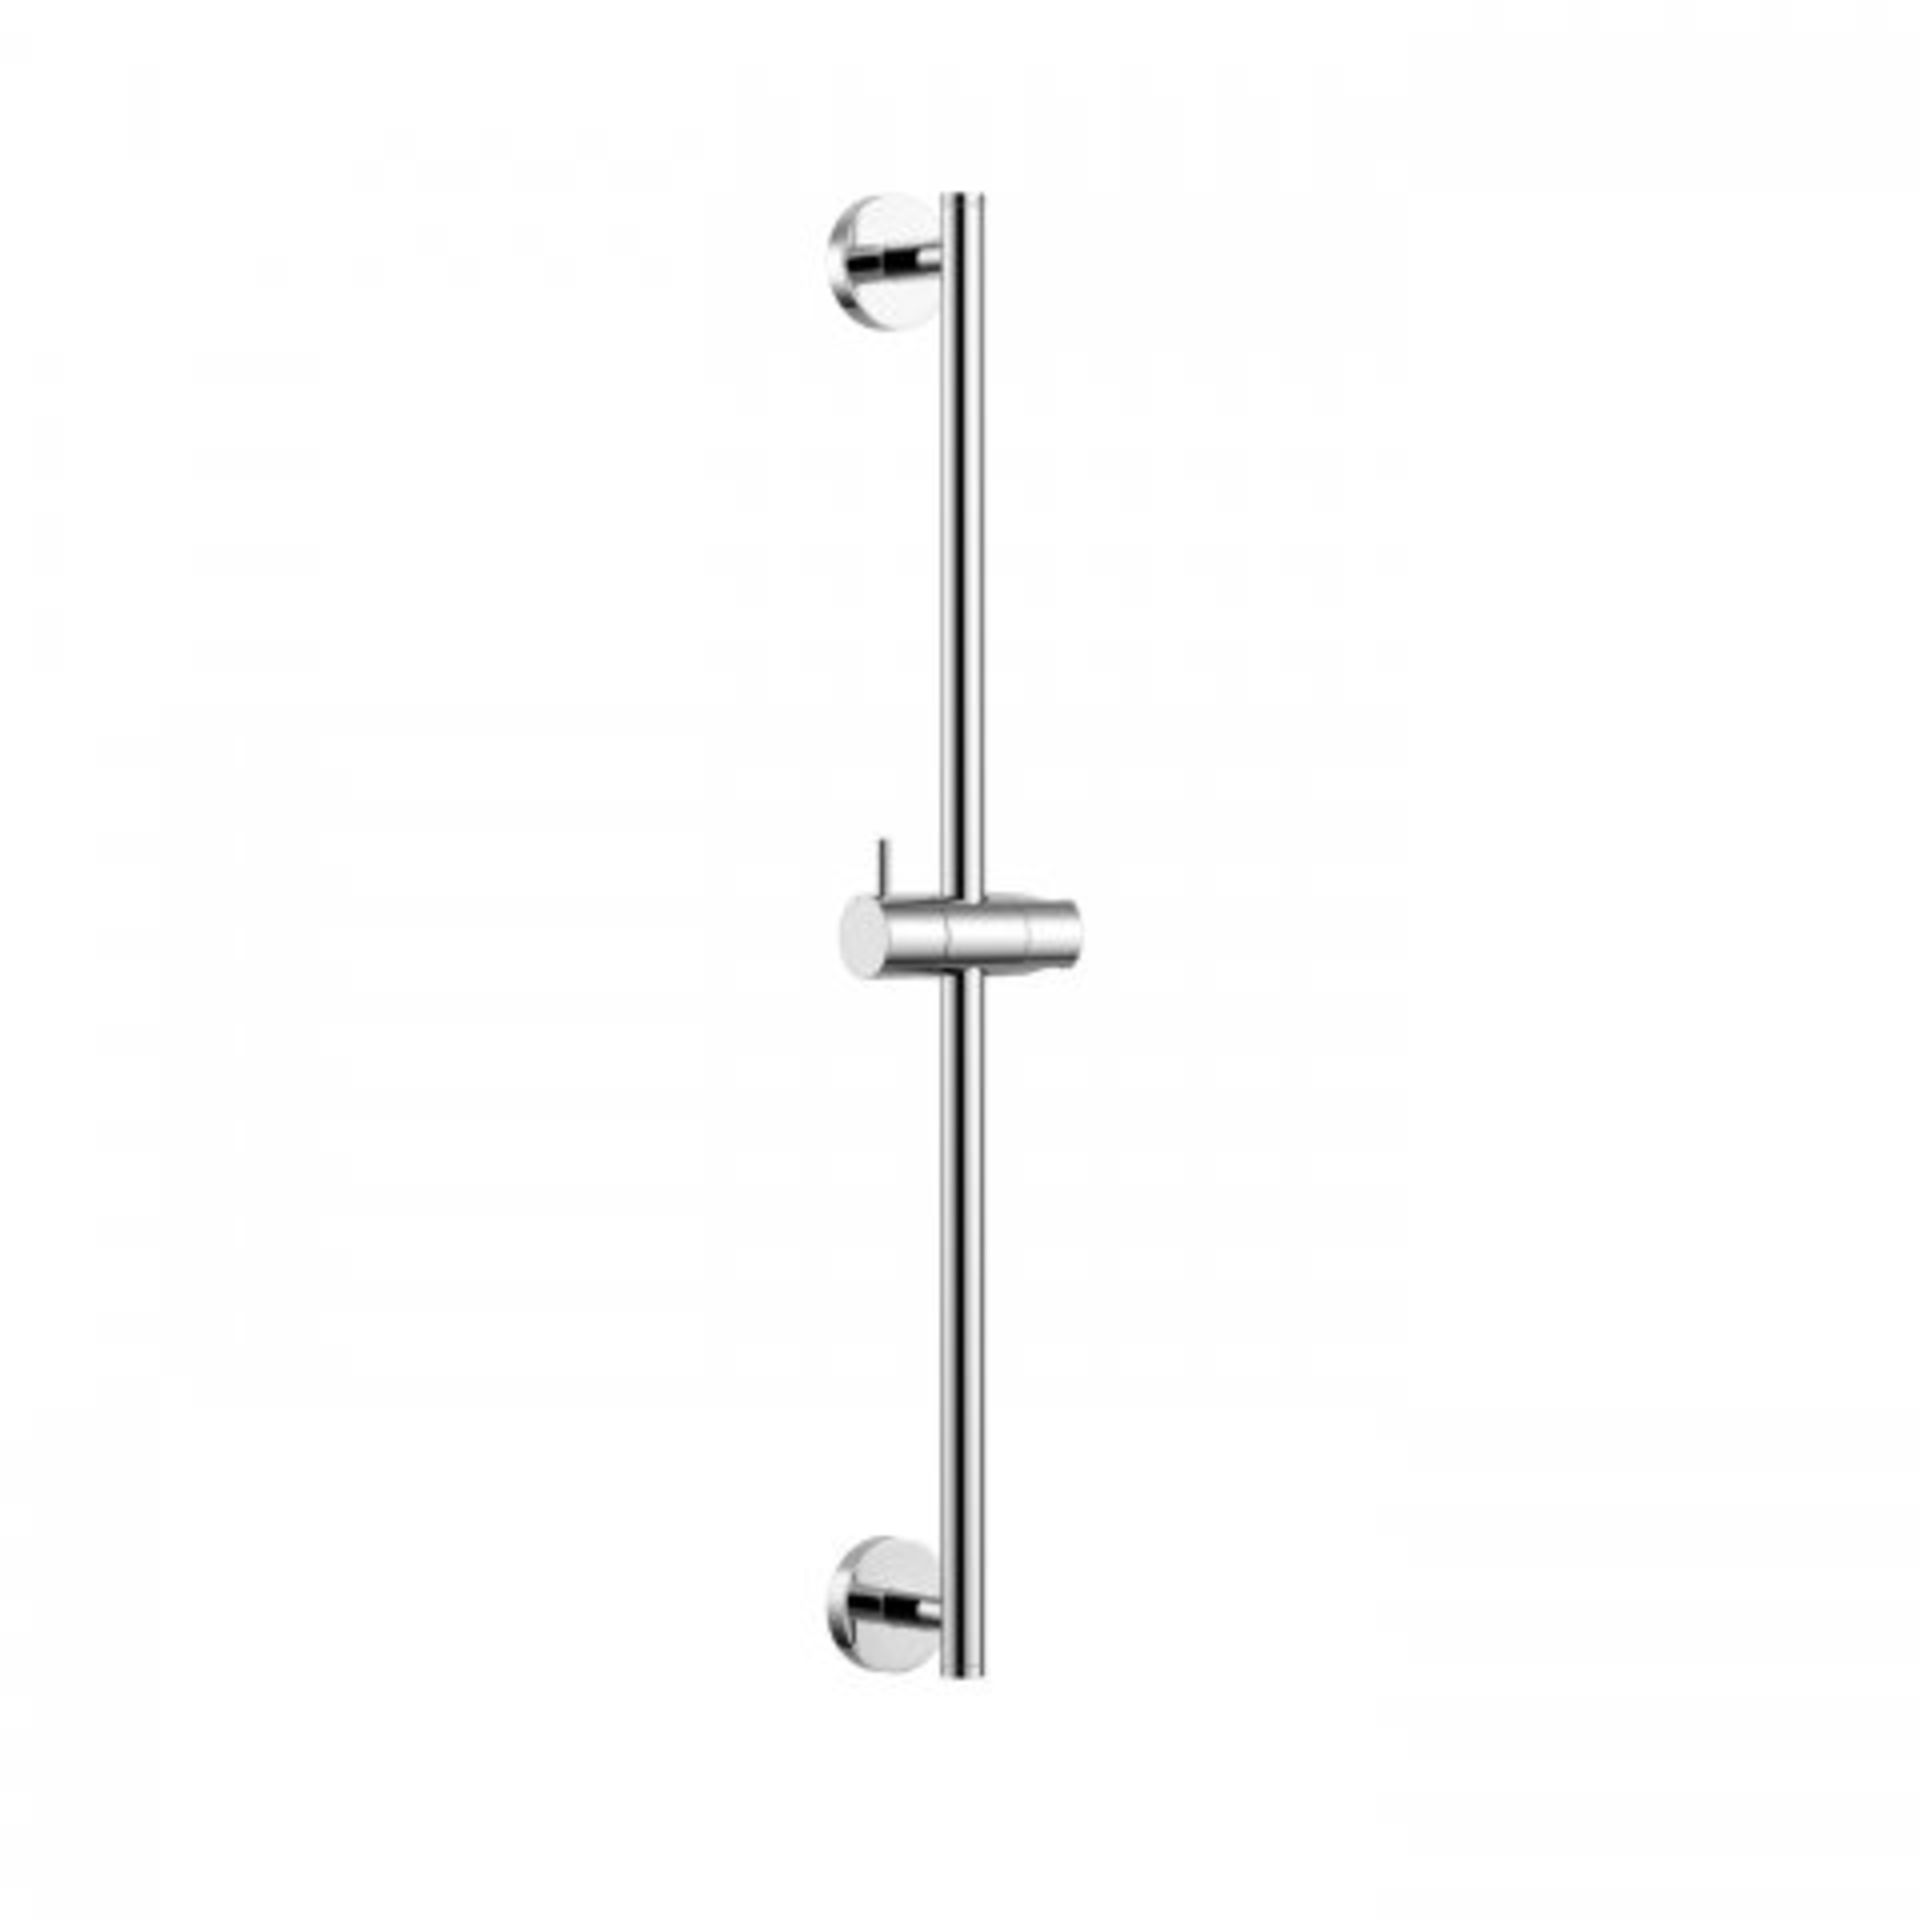 (N182) Adjustable Round Stainless Steel Riser Rail Simplistic Style : This fixed height riser rail